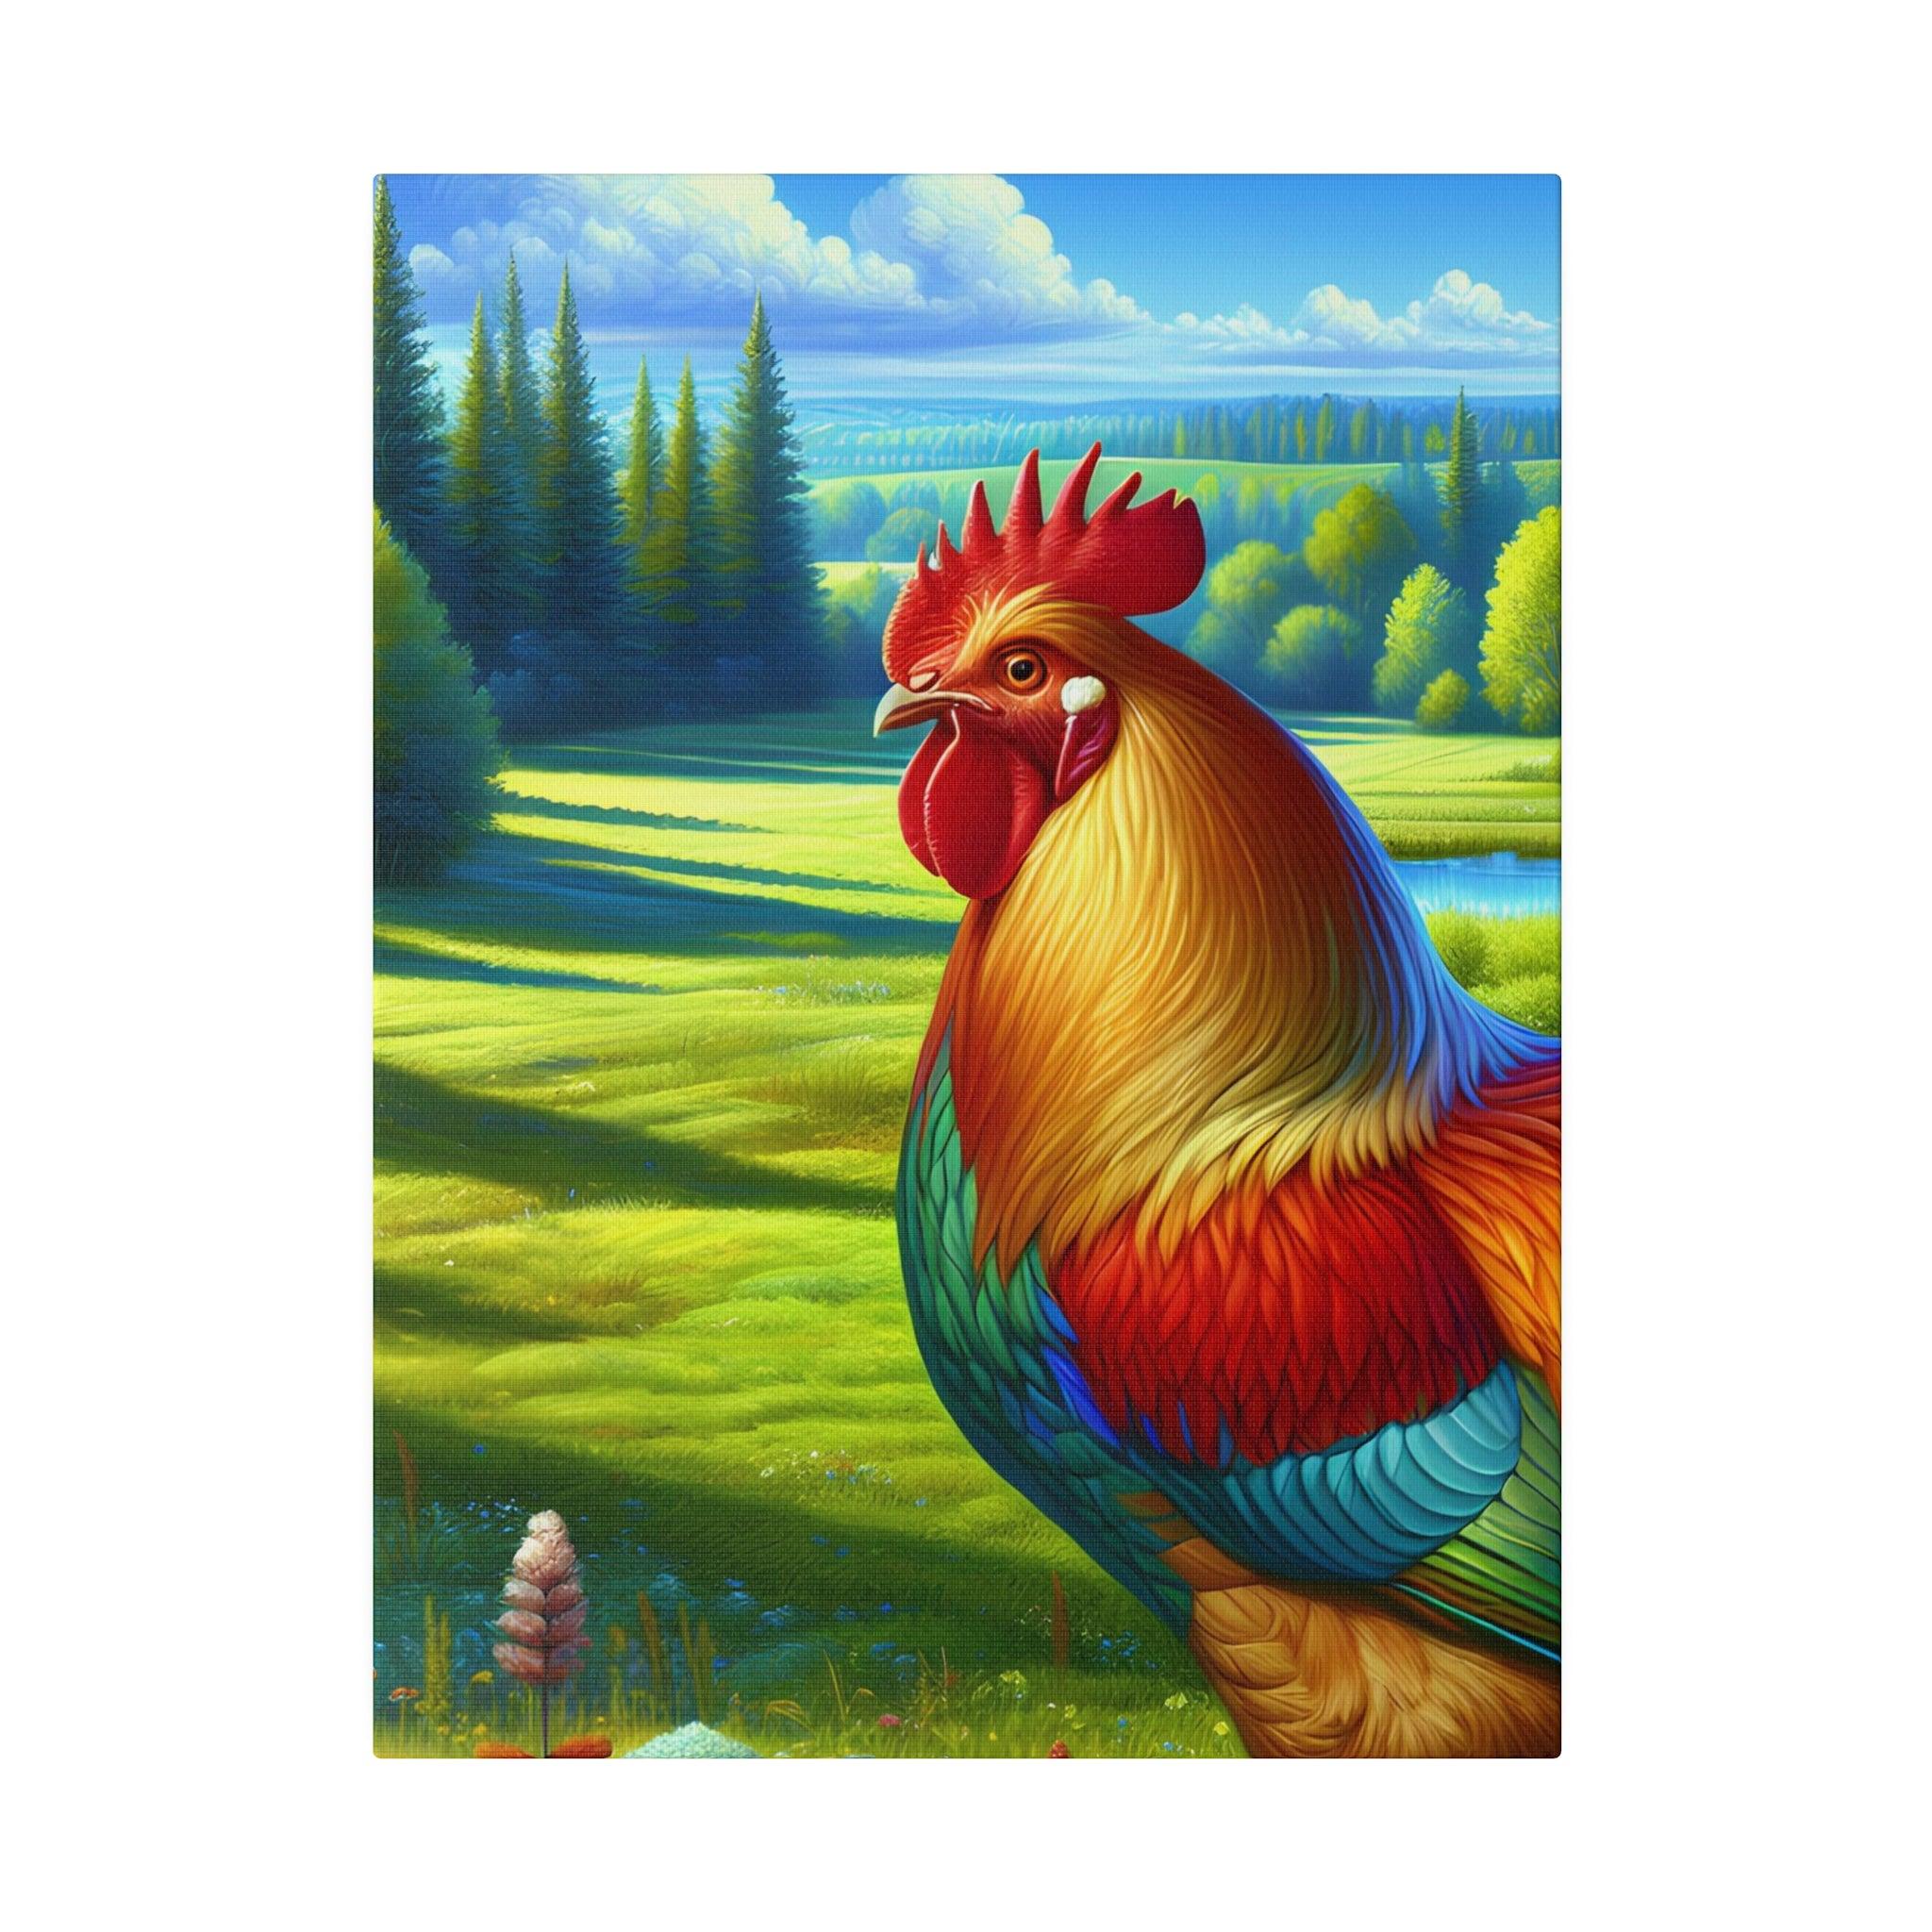 "Chicklectic Visions: Uniquely Crafted Chicken-Inspired Canvas Wall Art" - The Alice Gallery